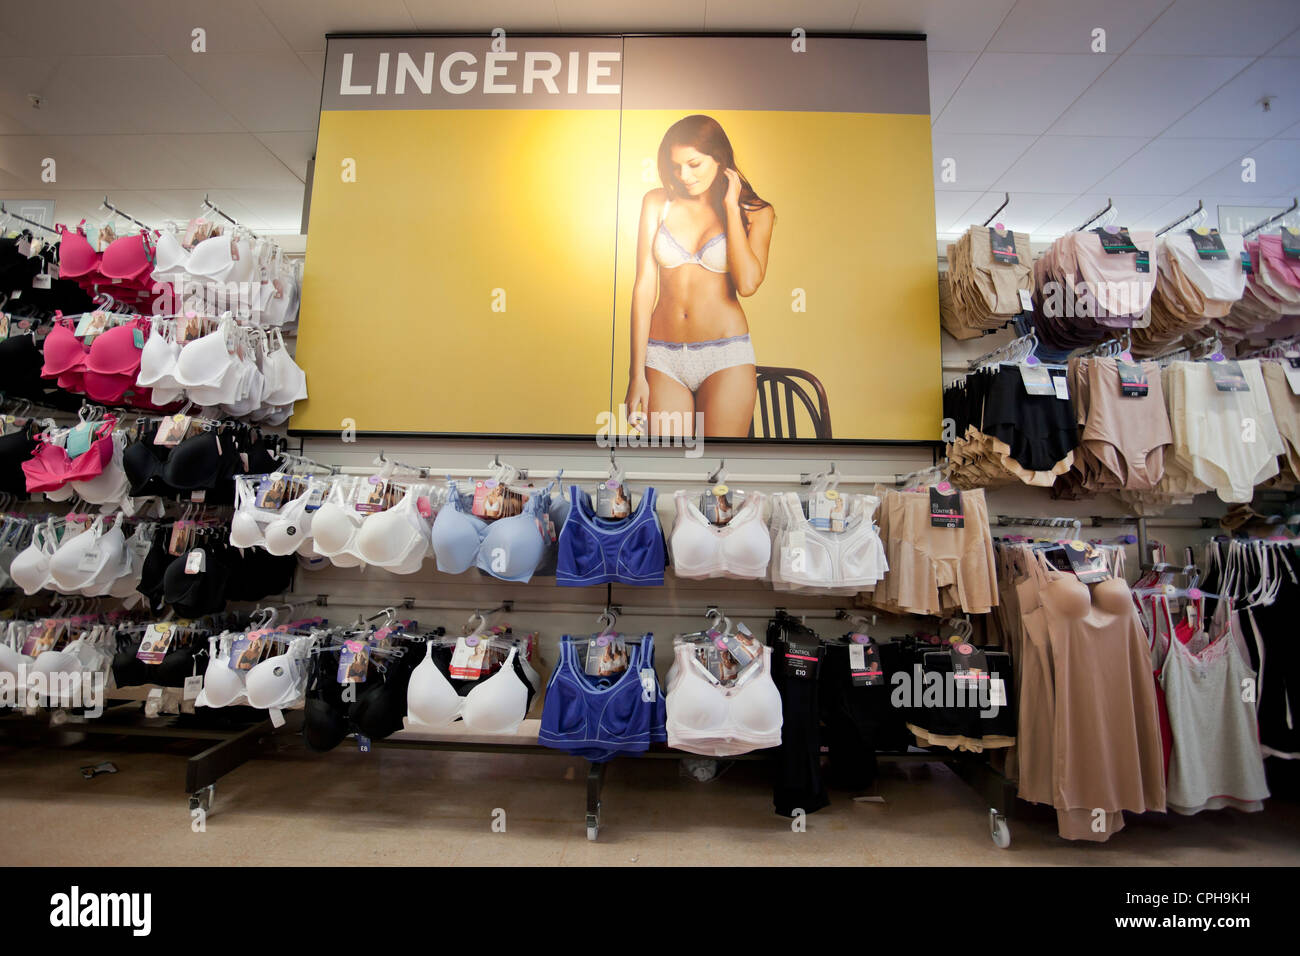 Lingerie section in a shop, London, England, UK Stock Photo - Alamy